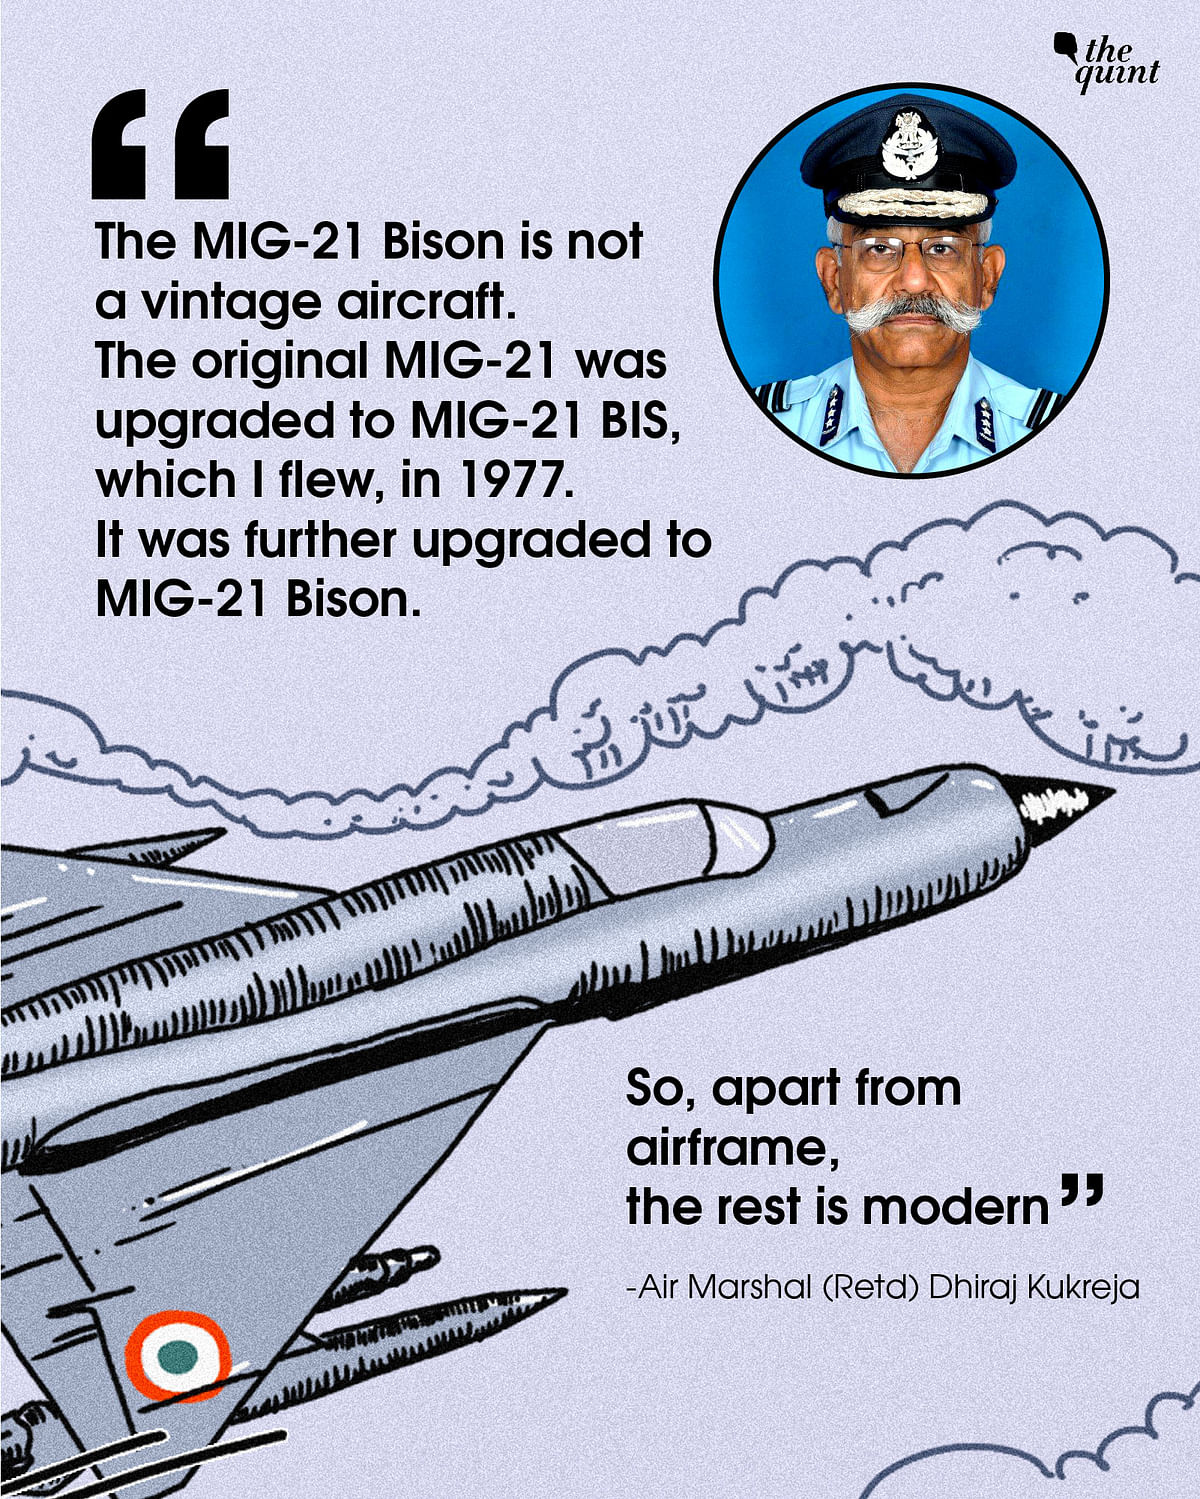 On 28 February, the Indian Air Force claimed a Pakistani F-16 fighter jet was shot down by an Indian MIG -21 Bison.